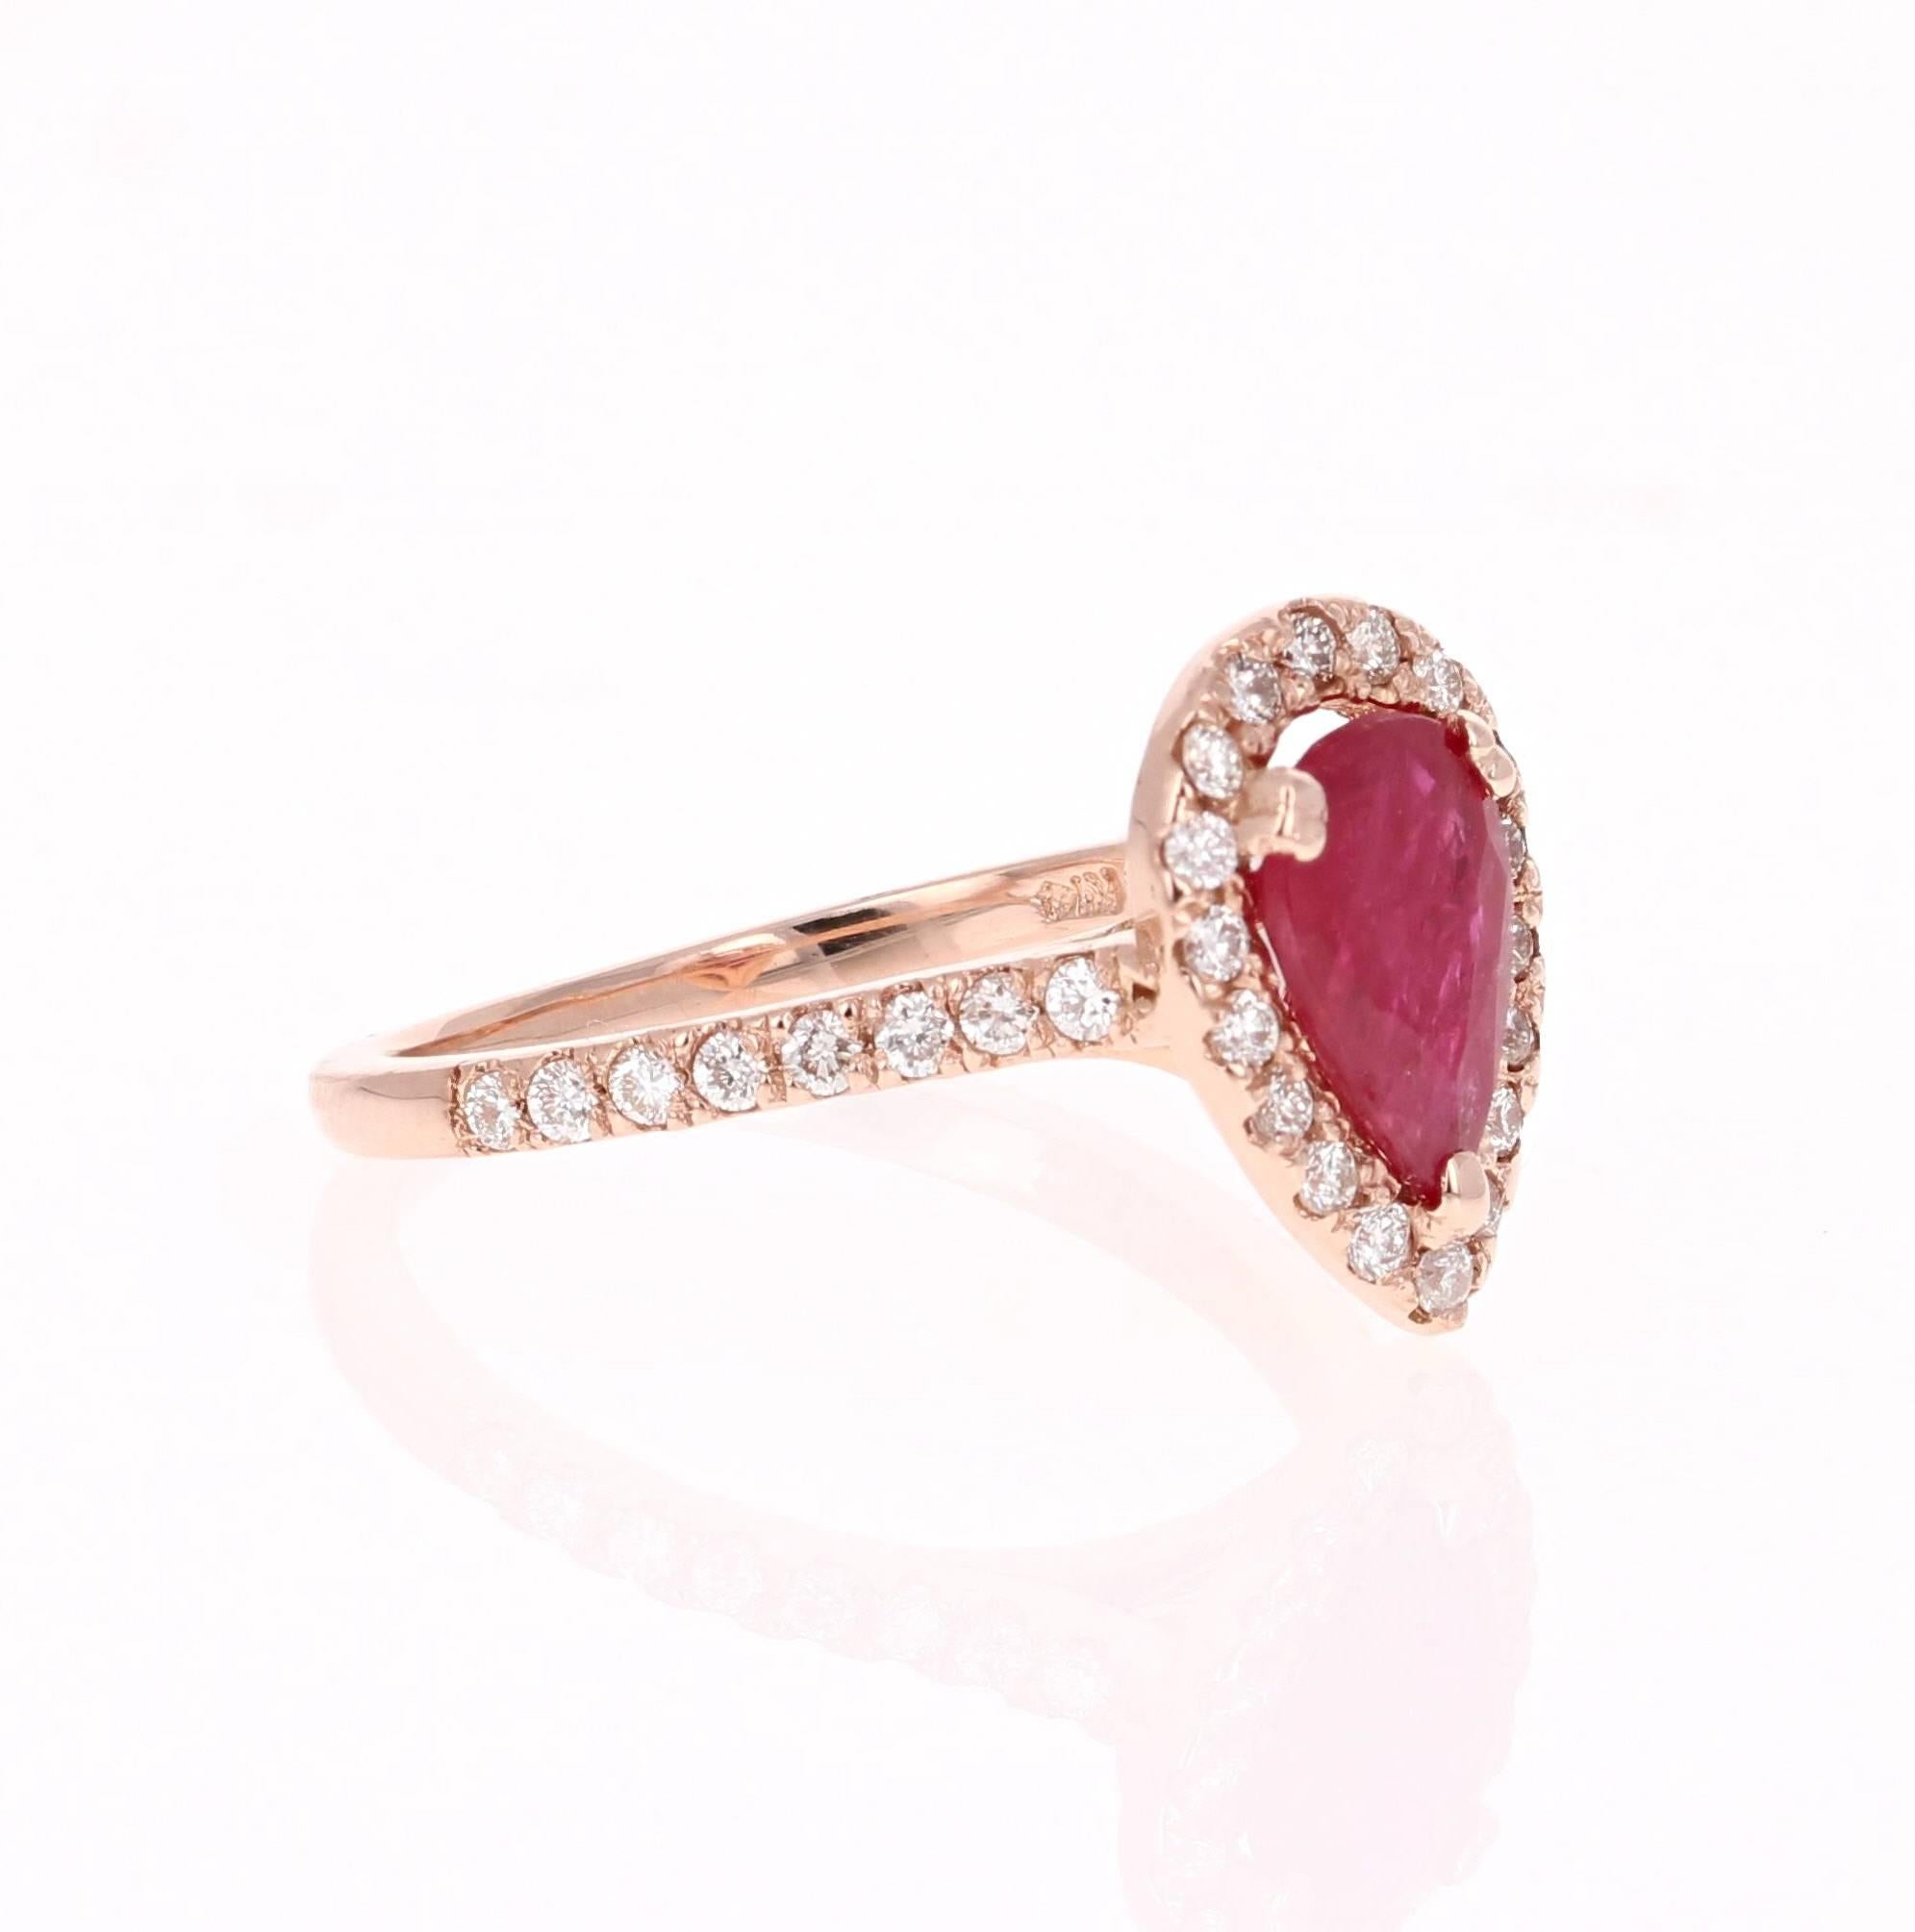 There is a Pear Cut Ruby set in the center of the ring that weighs 1.51 carats.  There are also 36 Round Cut Diamonds that weigh 0.70 carats (Clarity: VS2, Color: H).  The total carat weight of the ring is 2.21 carats.  

The ring is casted in 14K